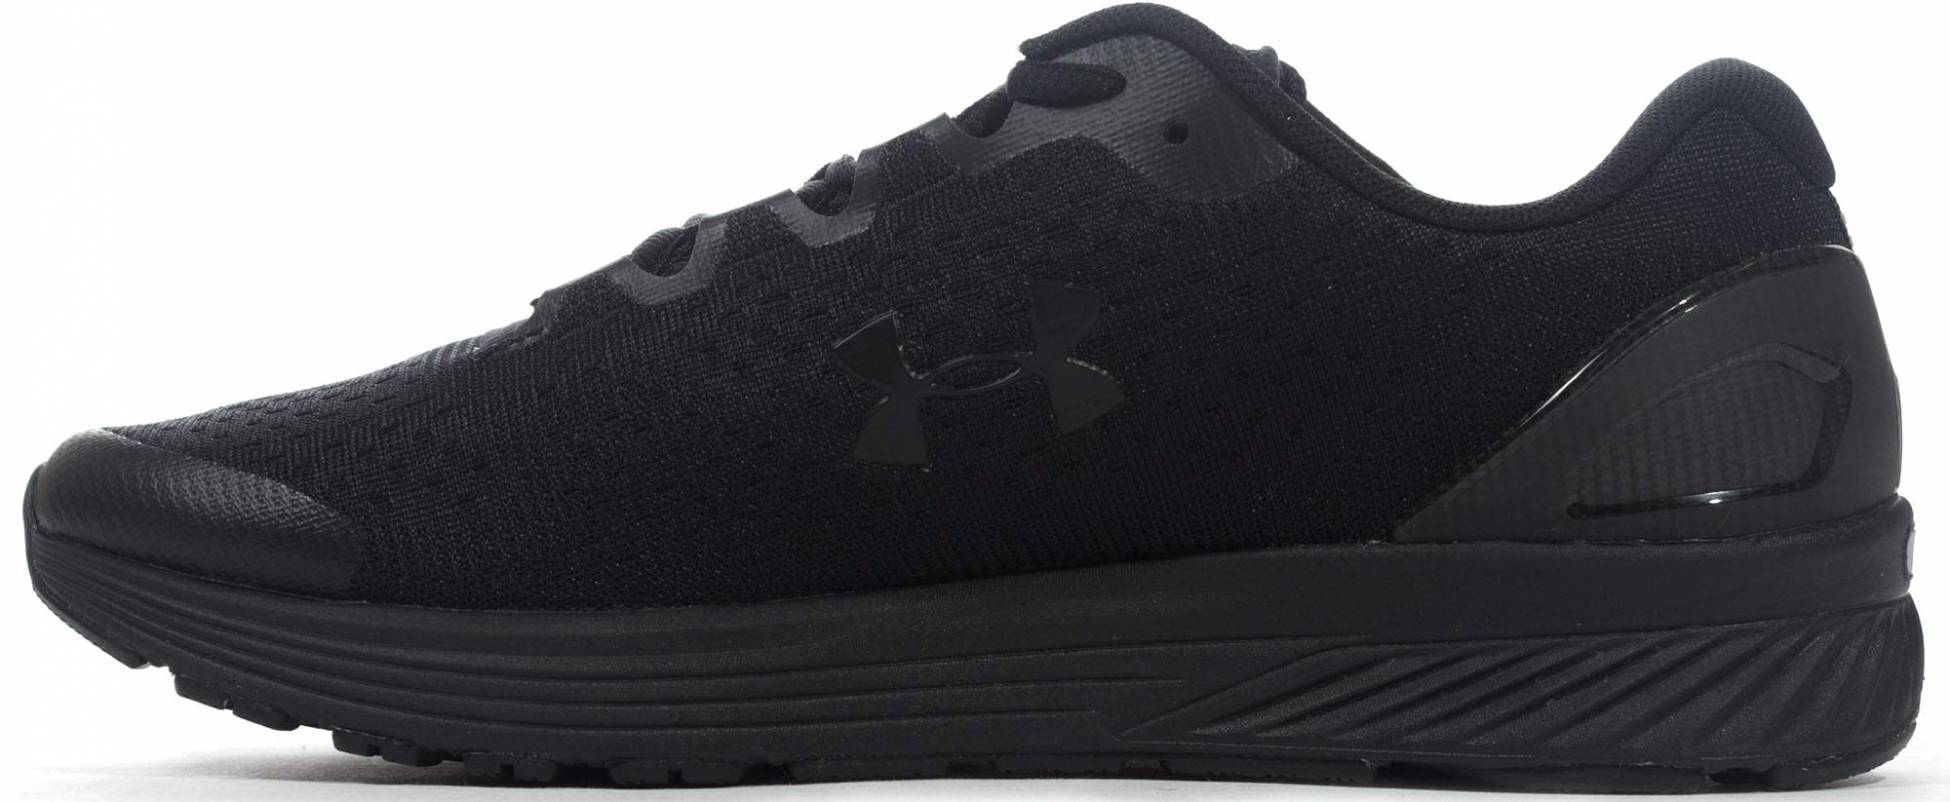 Black Under Armour Charged Bandit 4 Womens Running Shoes 